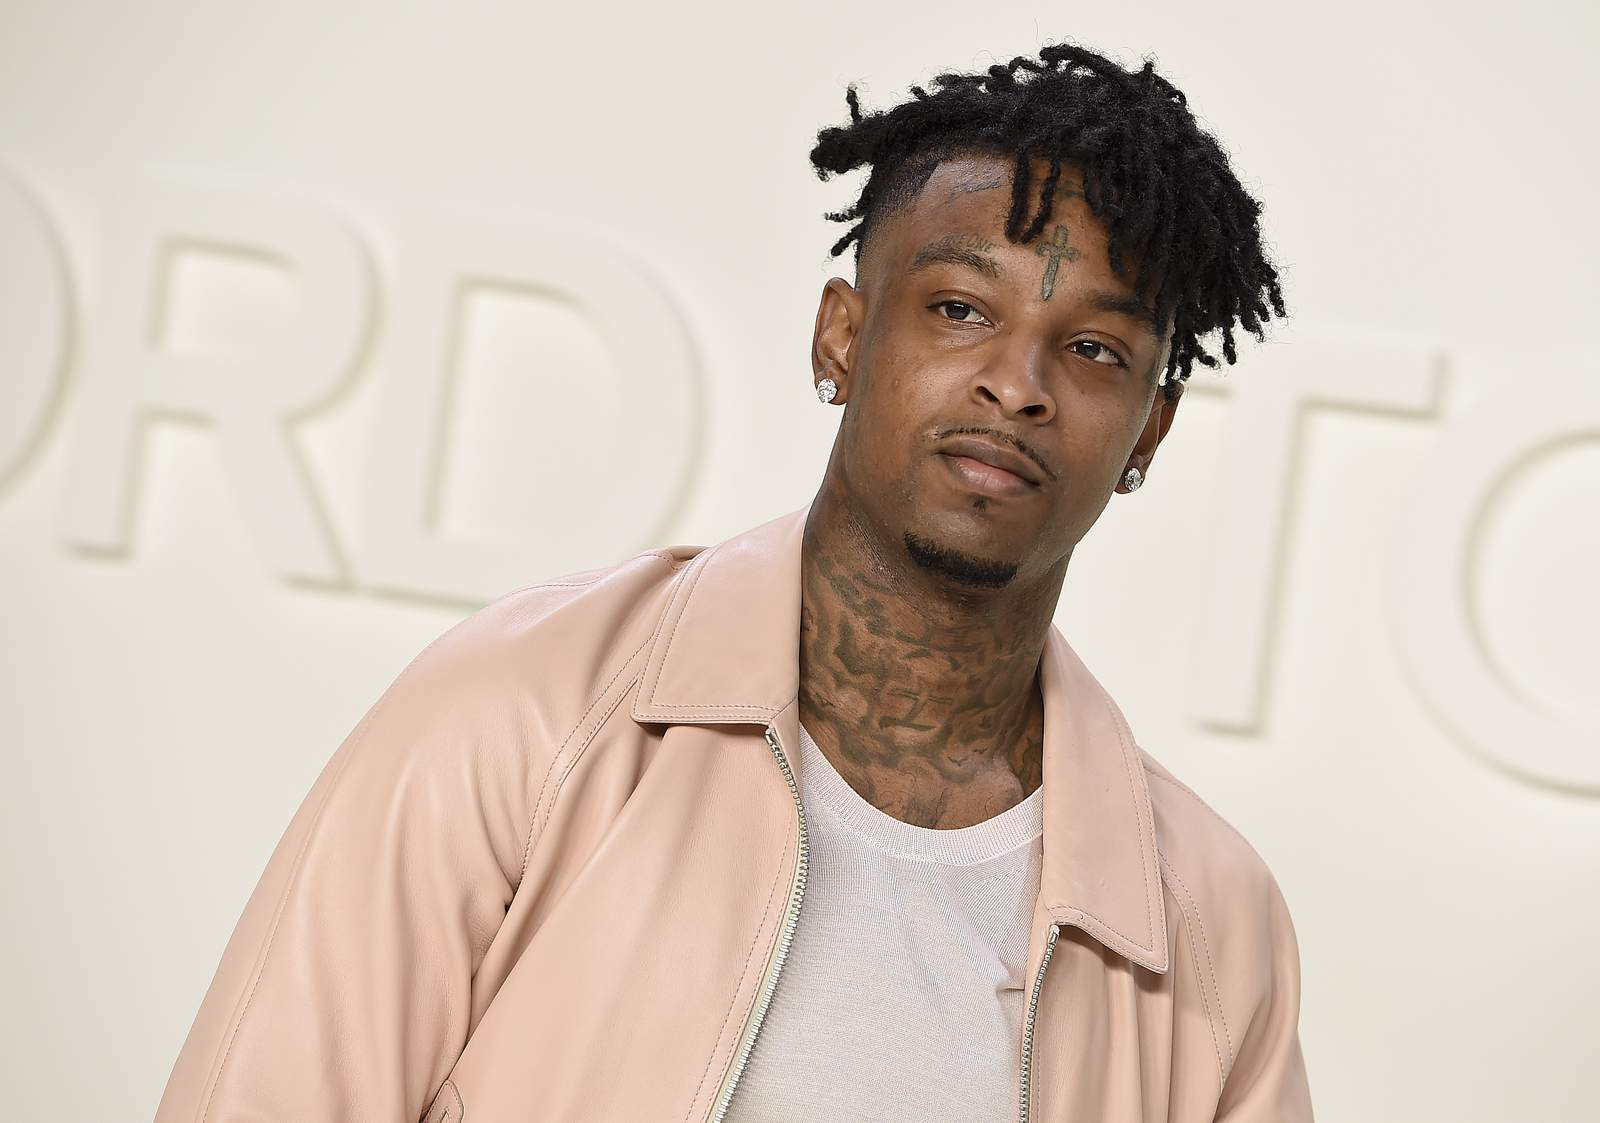 21 Savage launches free online financial program for youth